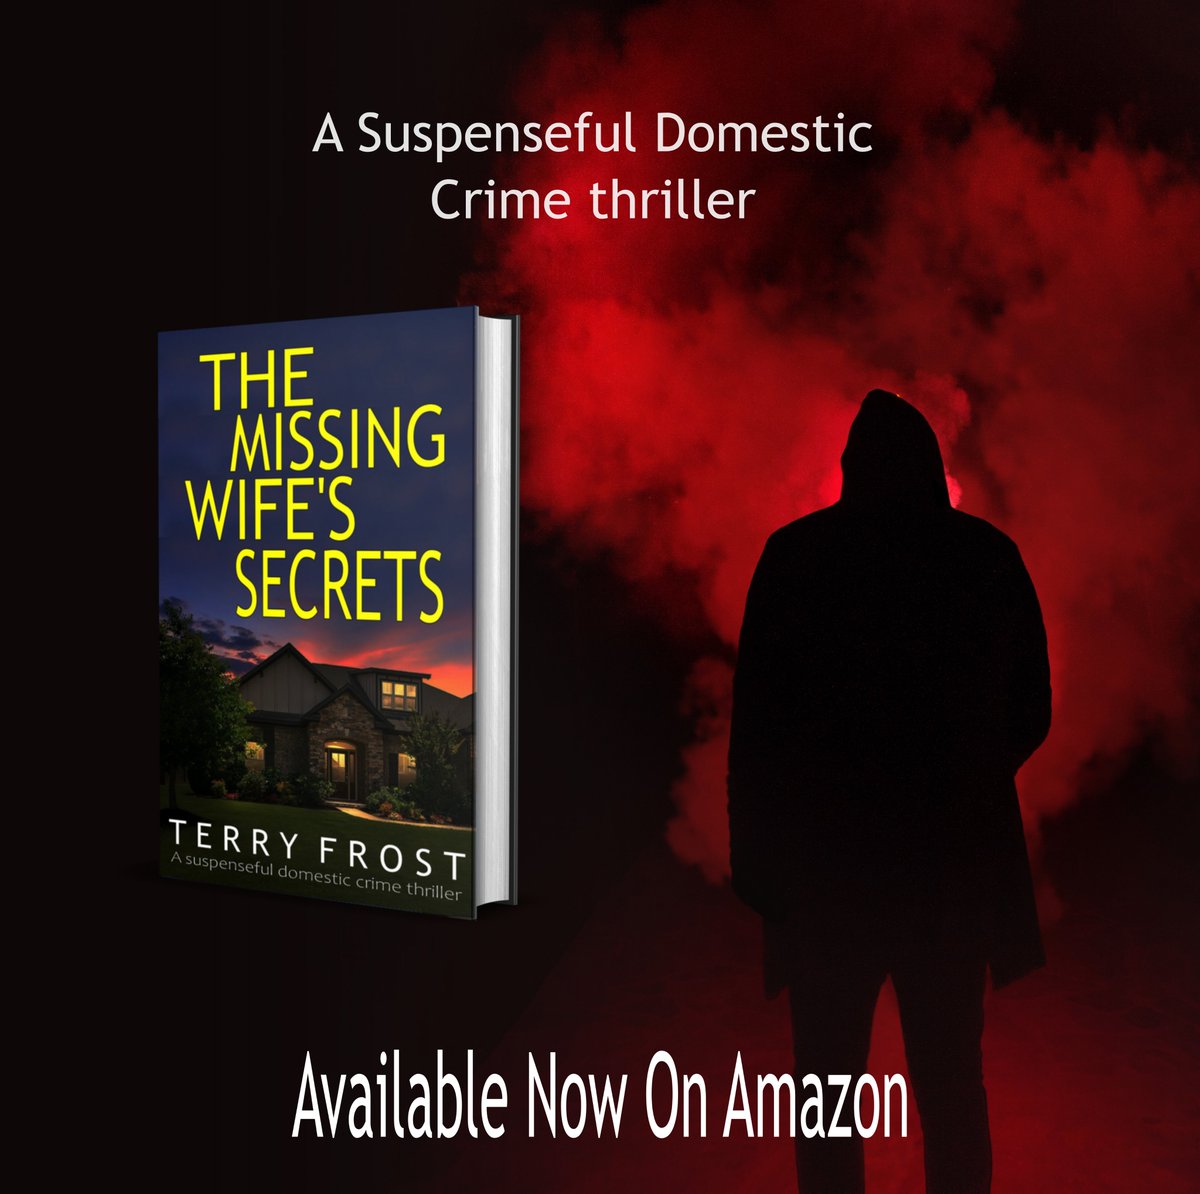 The Missing Wife's Secrets - A suspenseful domestic crime thriller
#readersoftwitter #CrimeFiction #thrillers #KindleUnlimited #authorscommunity #BookTwitter #crimethrillerbooks #domesticthriller